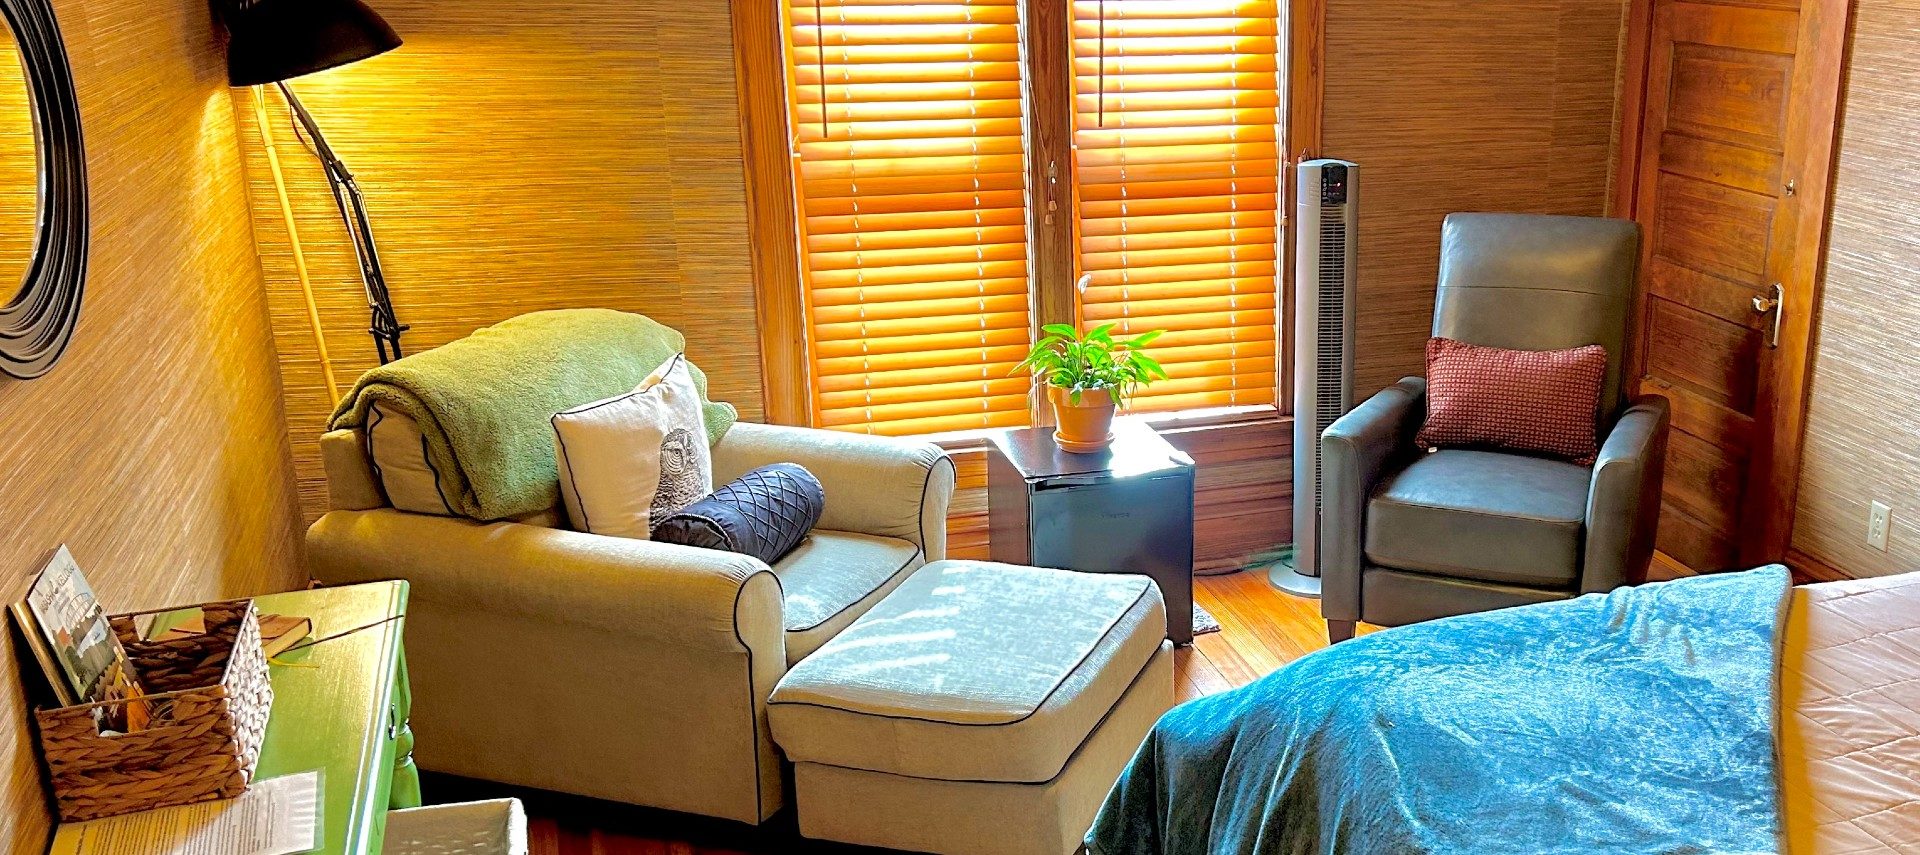 Sitting area off a bedroom with two upholstered sitting chairs, table with a plant by a large window with blinds